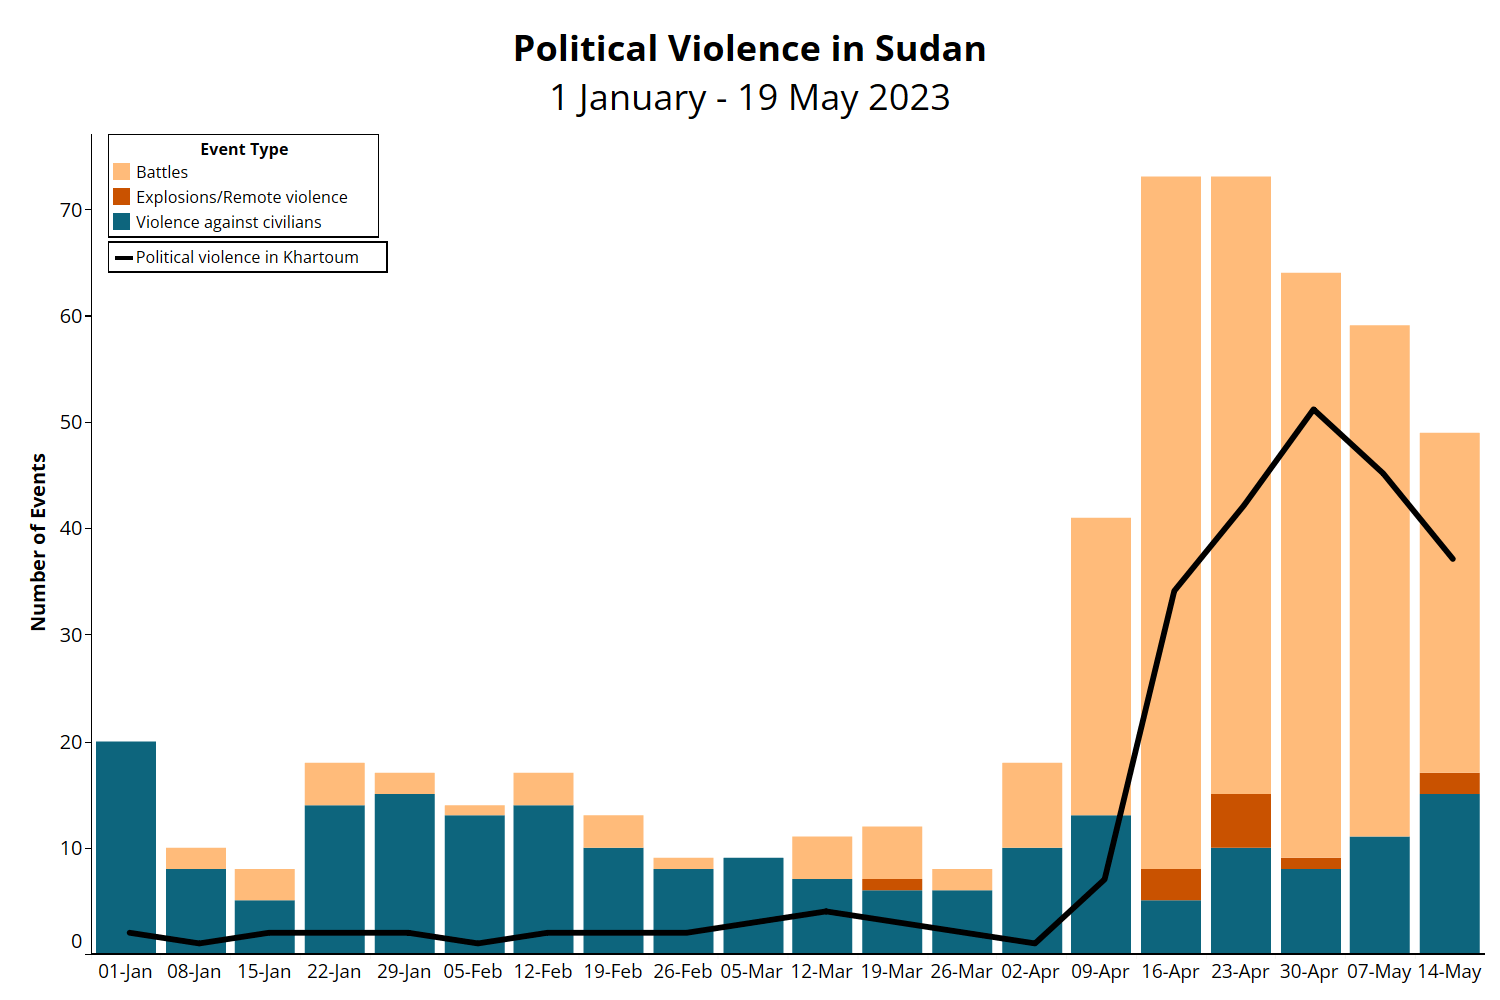 stacked bar chart showing frequency of political violence events per week in Sudan from January to May 2023